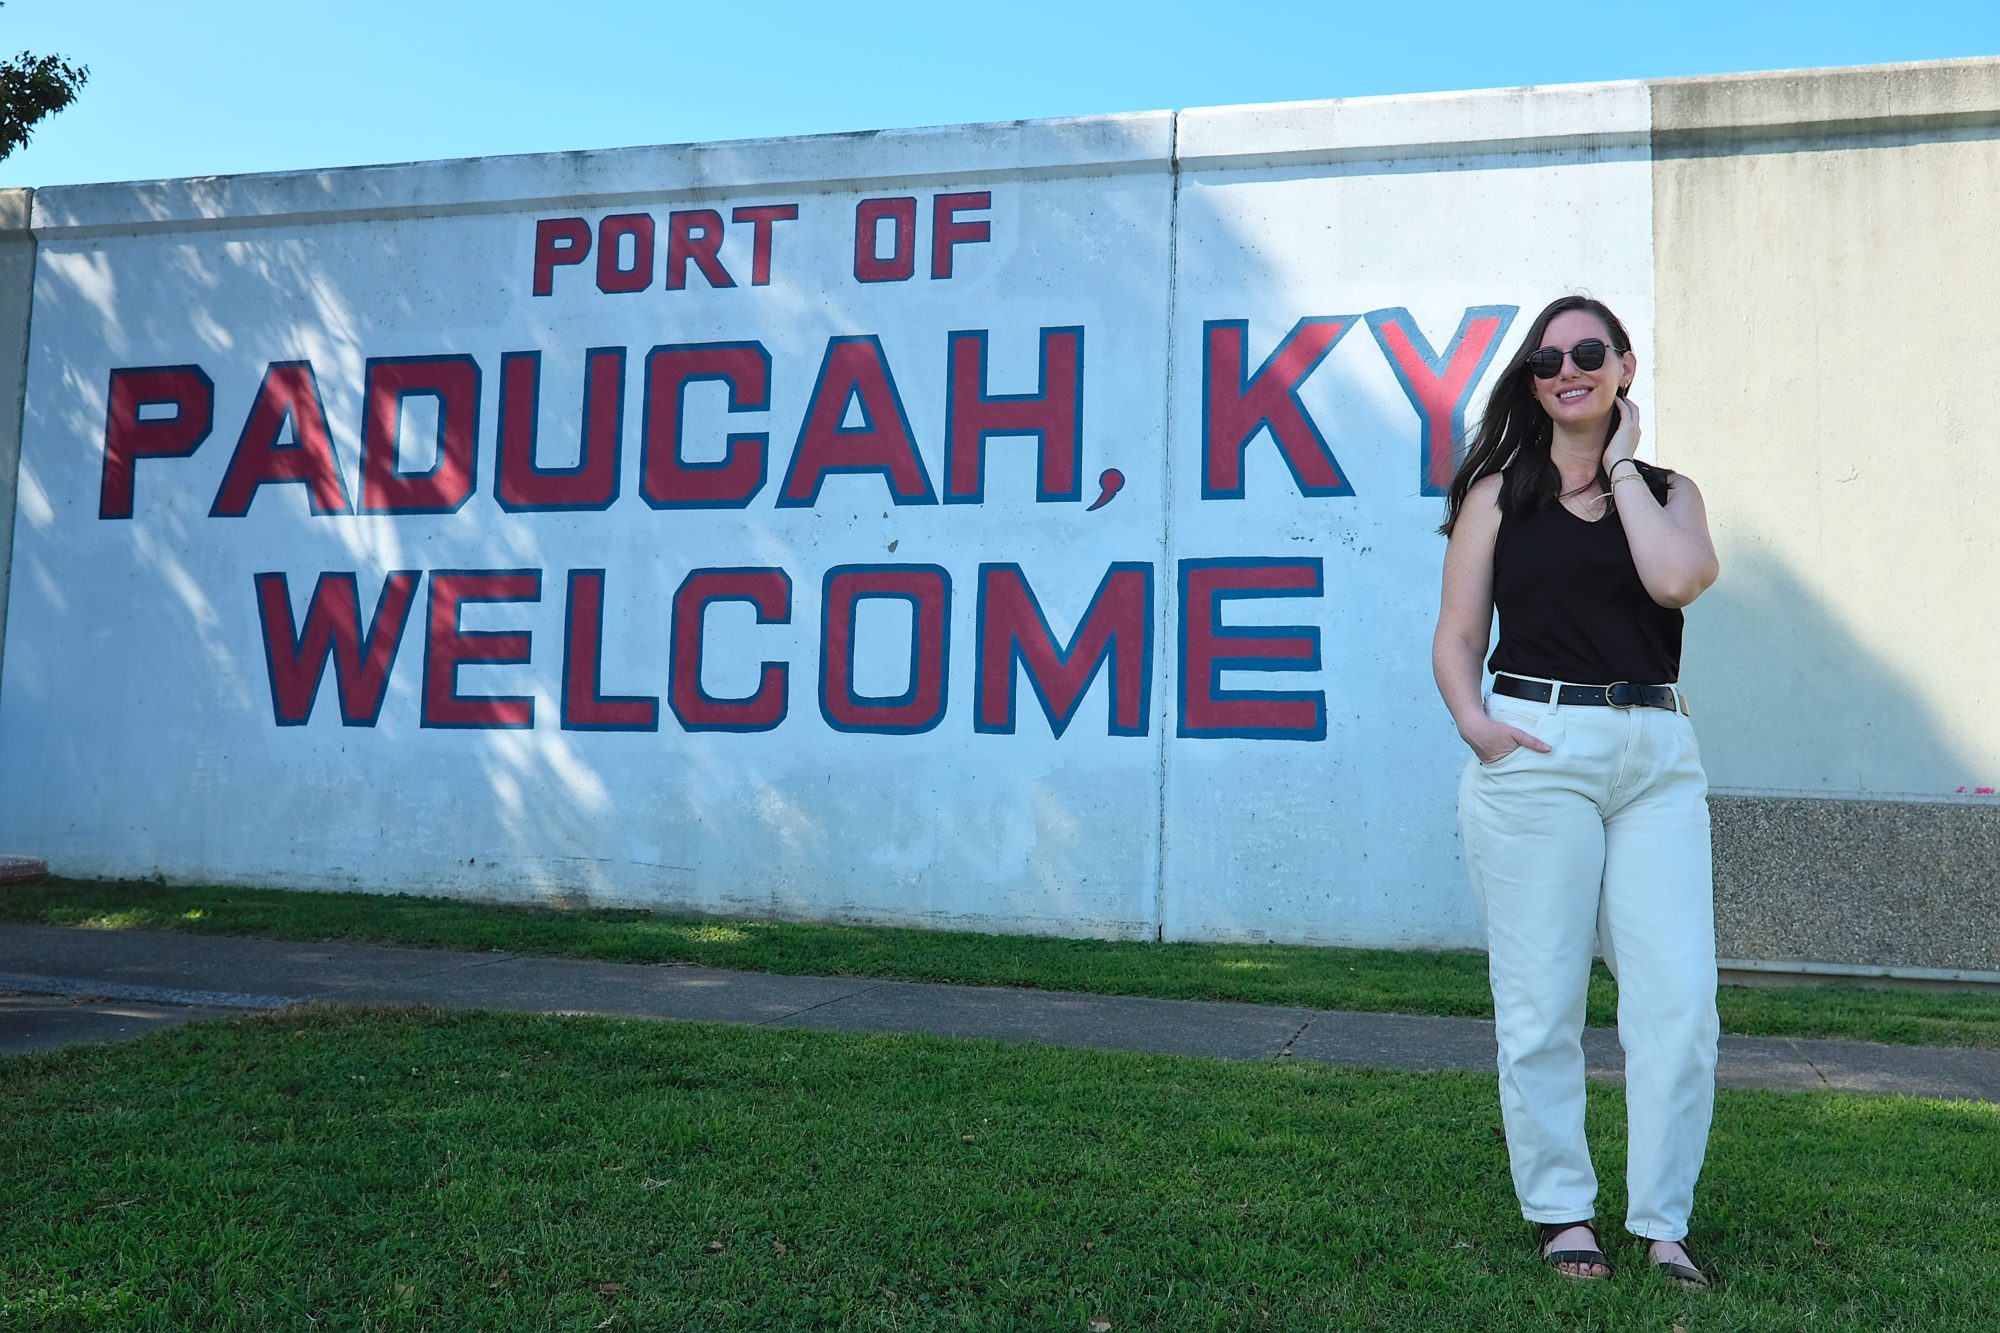 Alyssa stands in front of the Port of Paducah mural